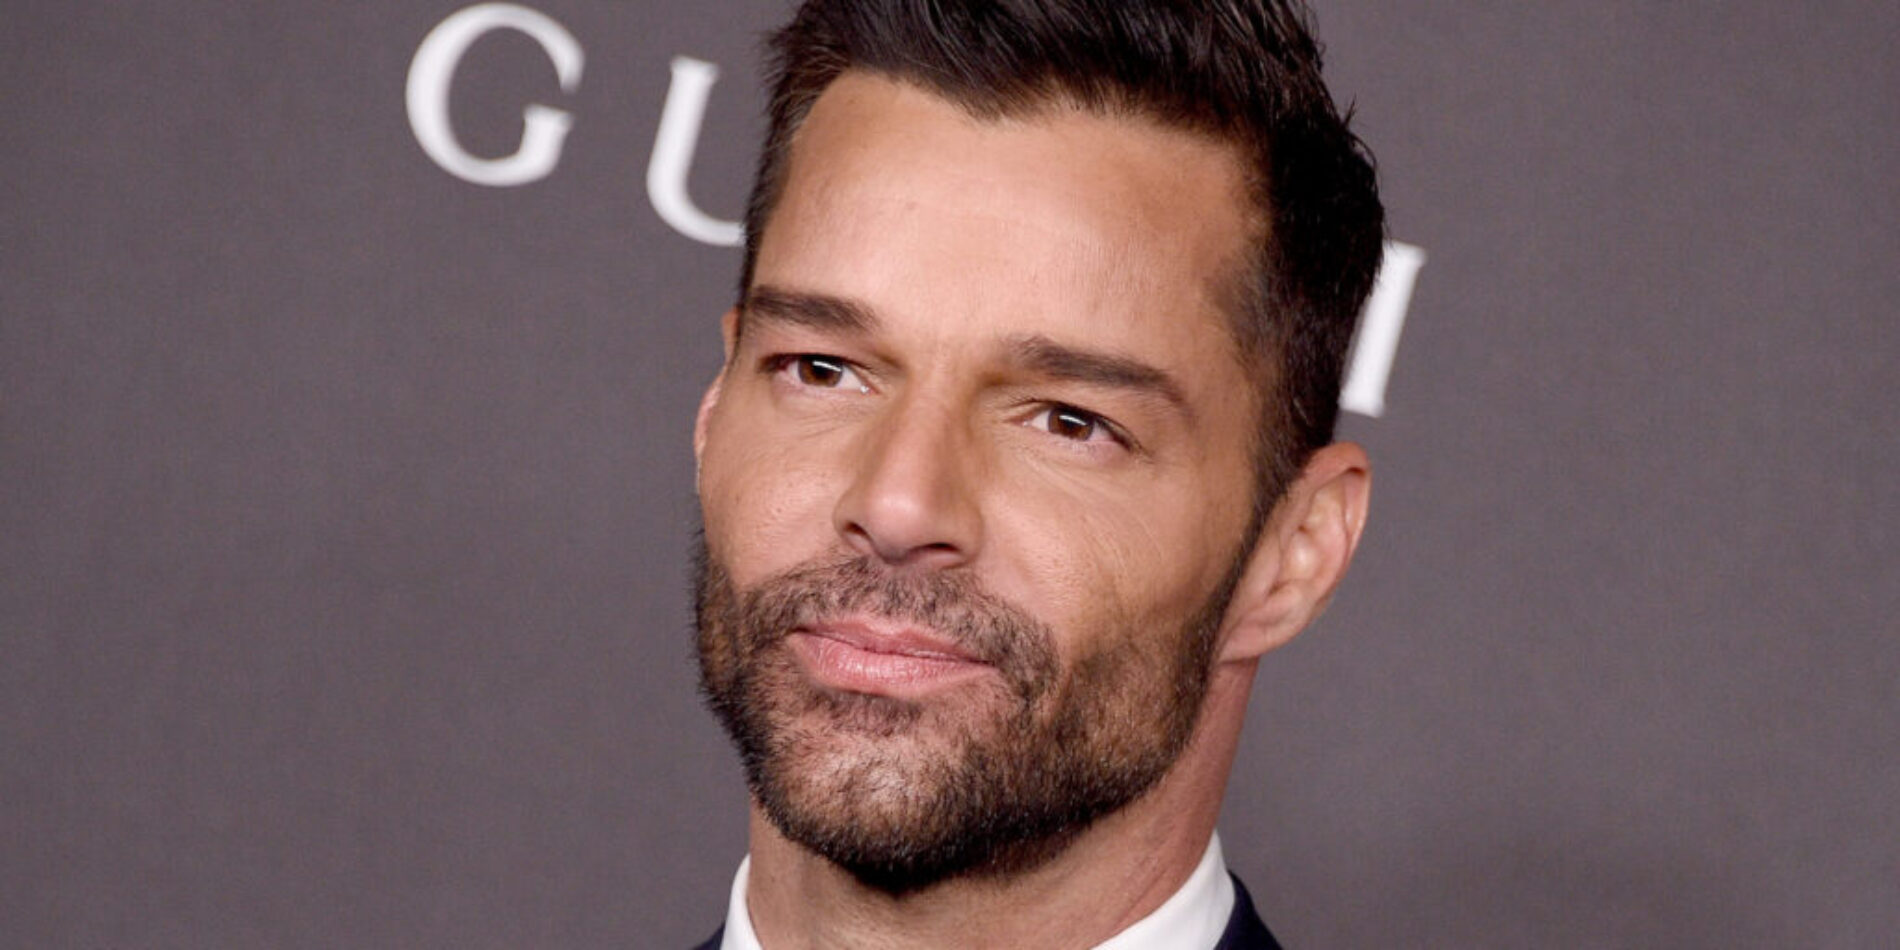 Ricky Martin Says He Cried Like Crazy After Coming Out – And Has Been Happy Since